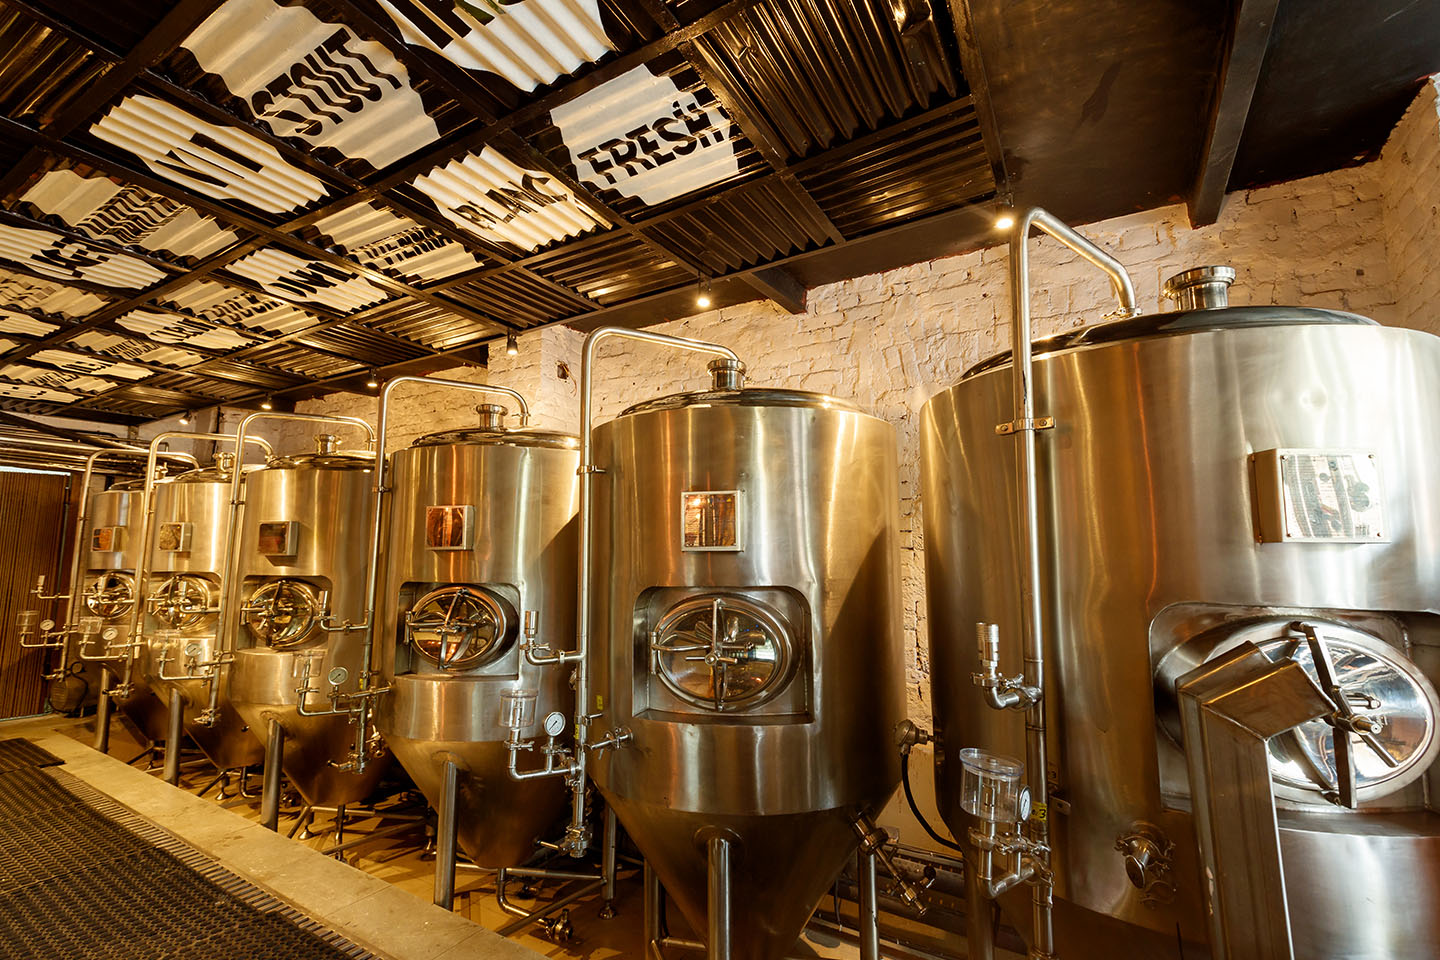 Delhi gets its first microbrewery 